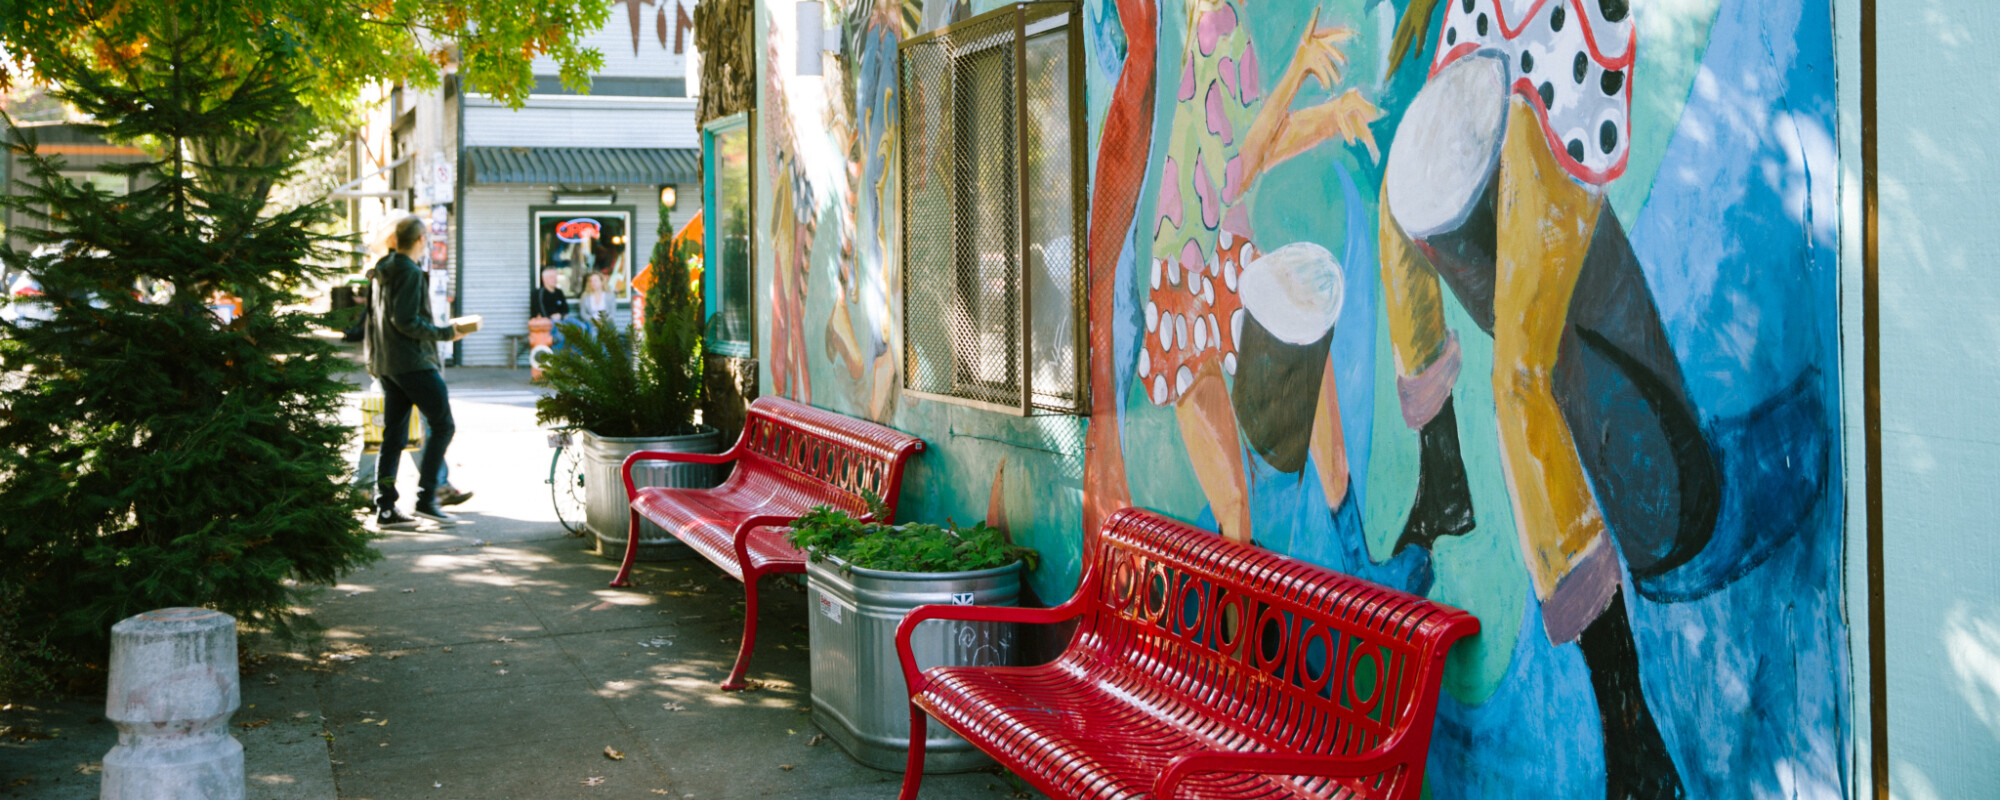 A sidewalk scene featuring trees (left) and the exterior wall of a building that has a vibrant mural featuring people of diverse ages and cultures dancing (right).